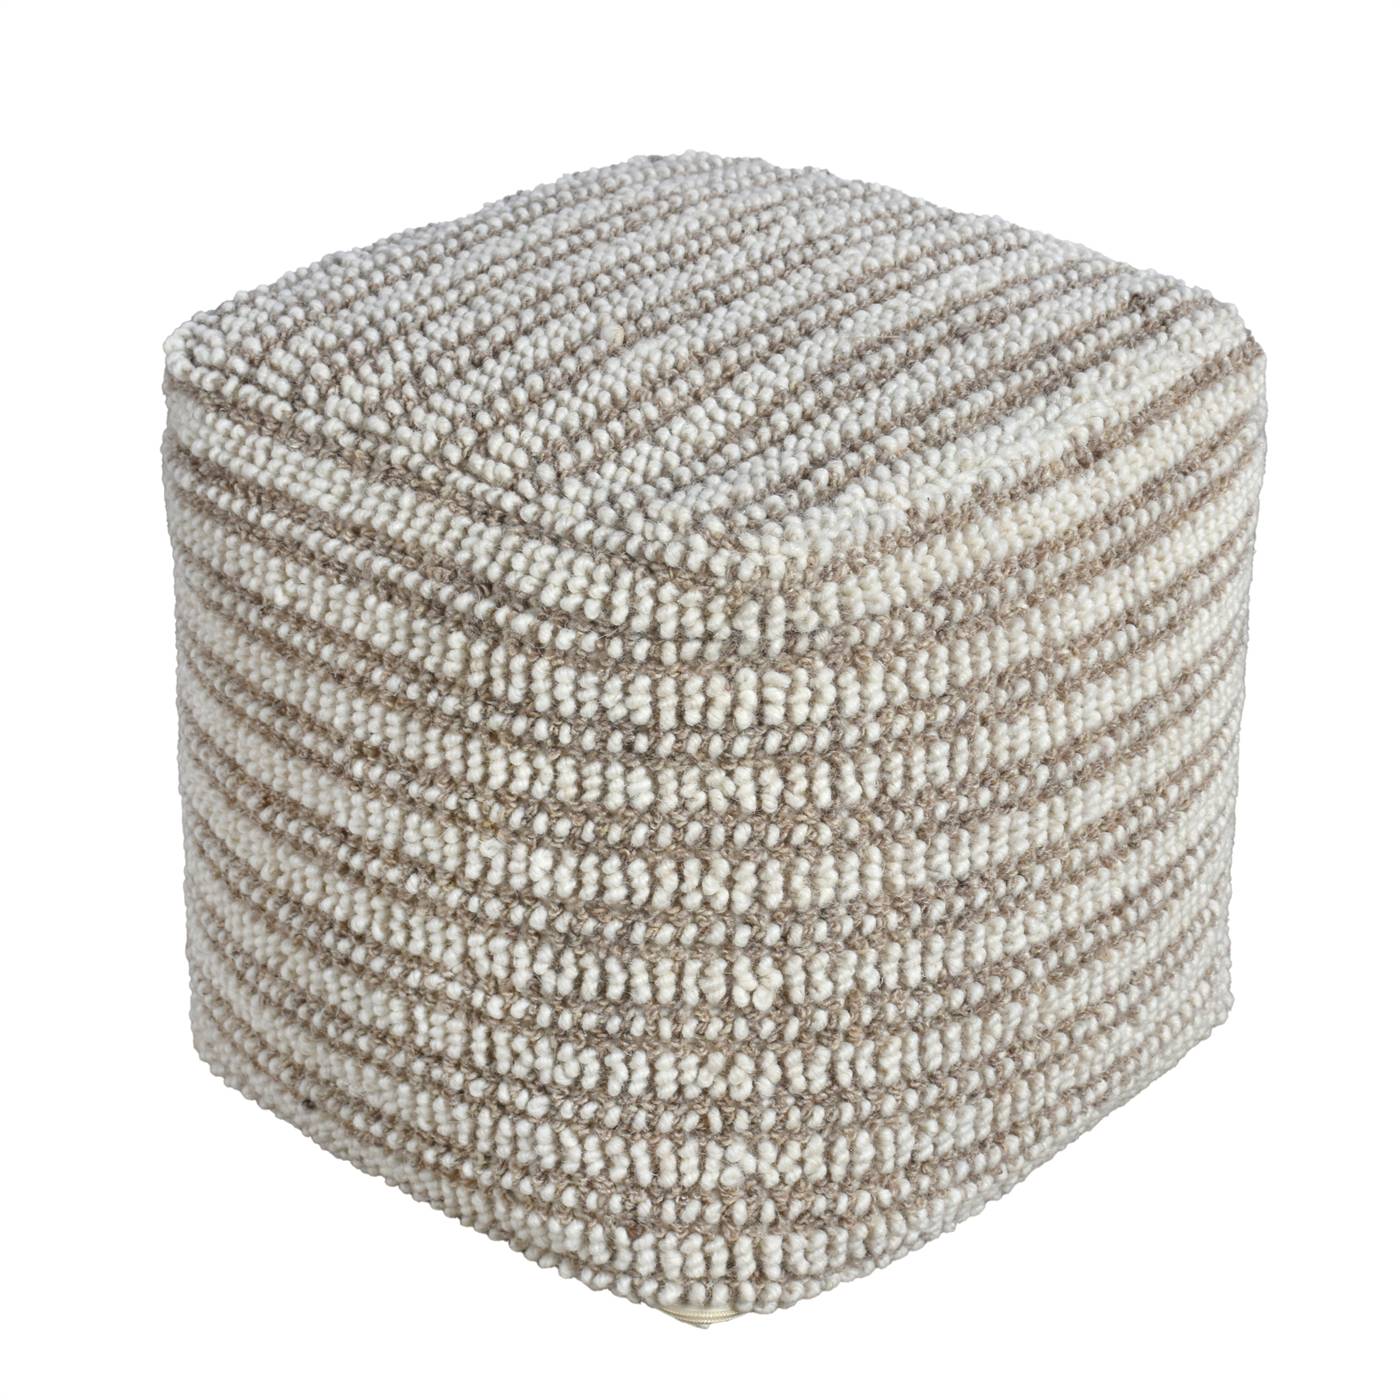 Audane Pouf, 40x40x40 cm, Natural White, Grey, Wool, Hand Woven, Handwoven, All Loop